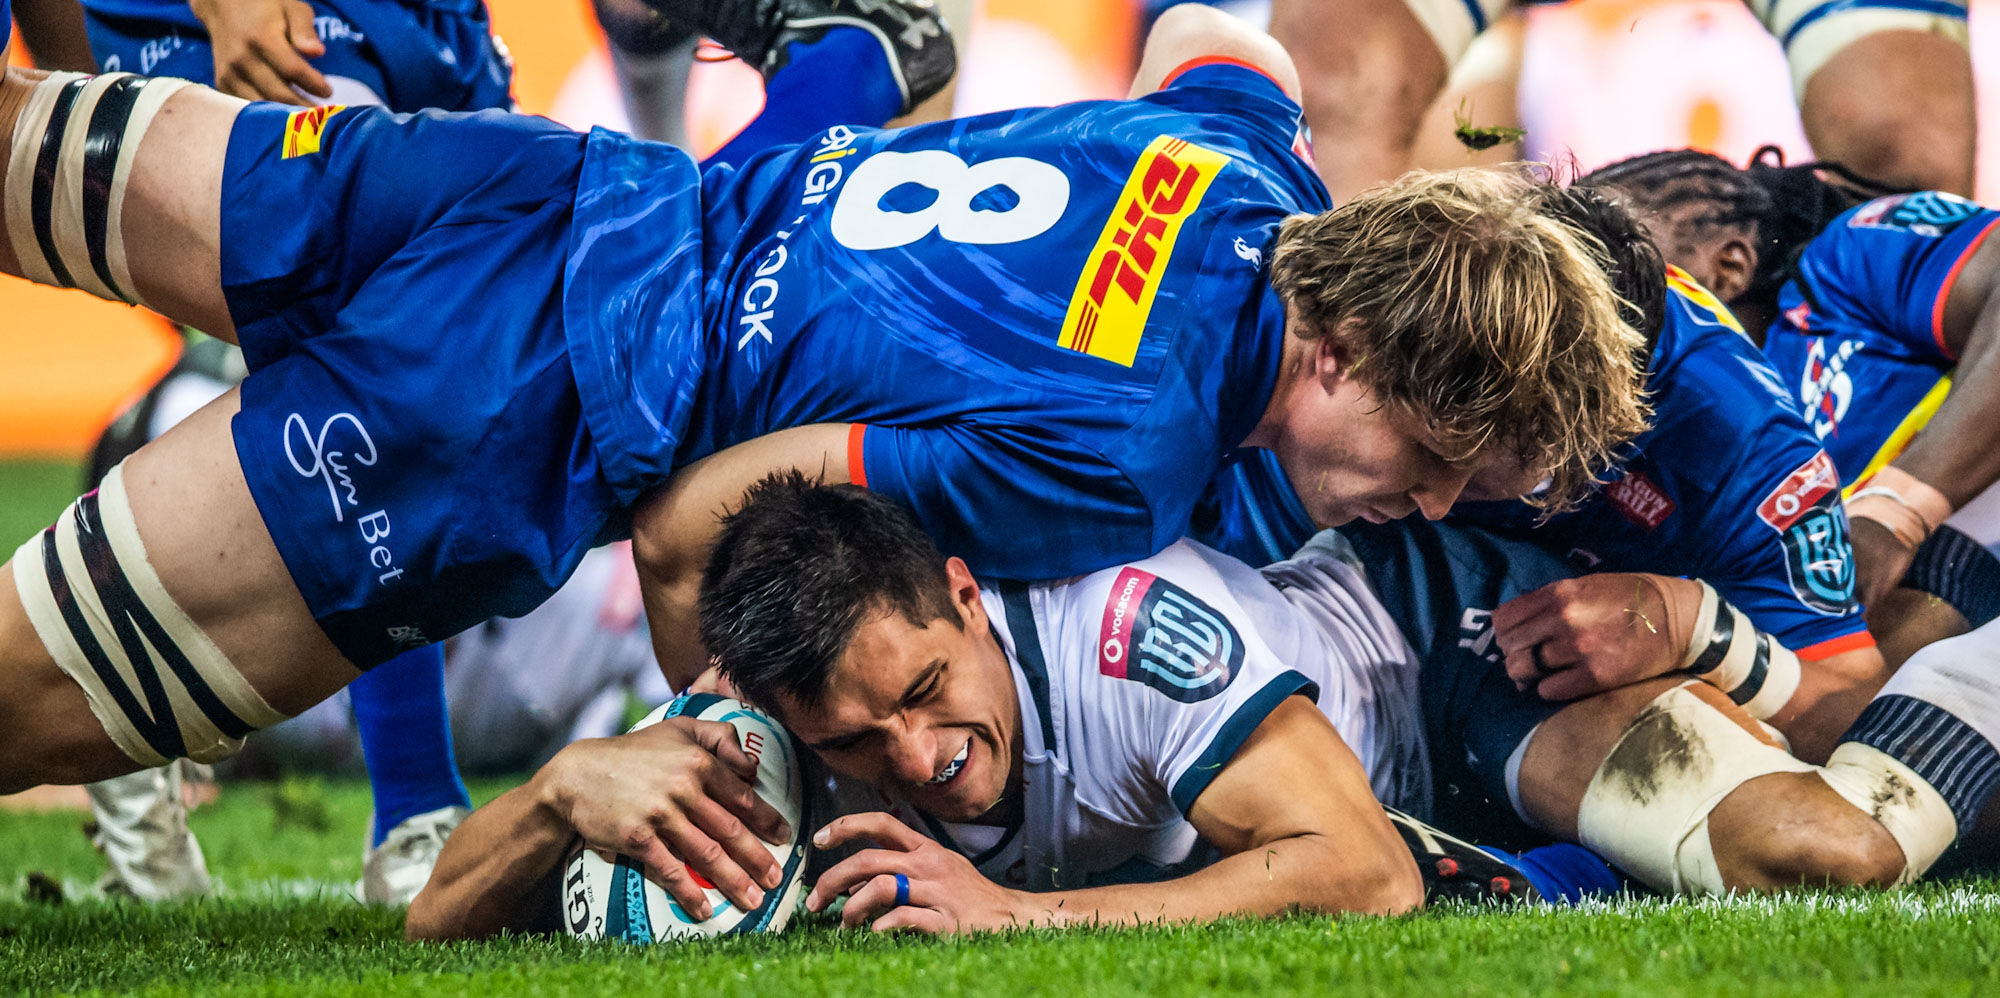 Harold Vorster scored the first try of the game in the third minute for the Vodacom Bulls.